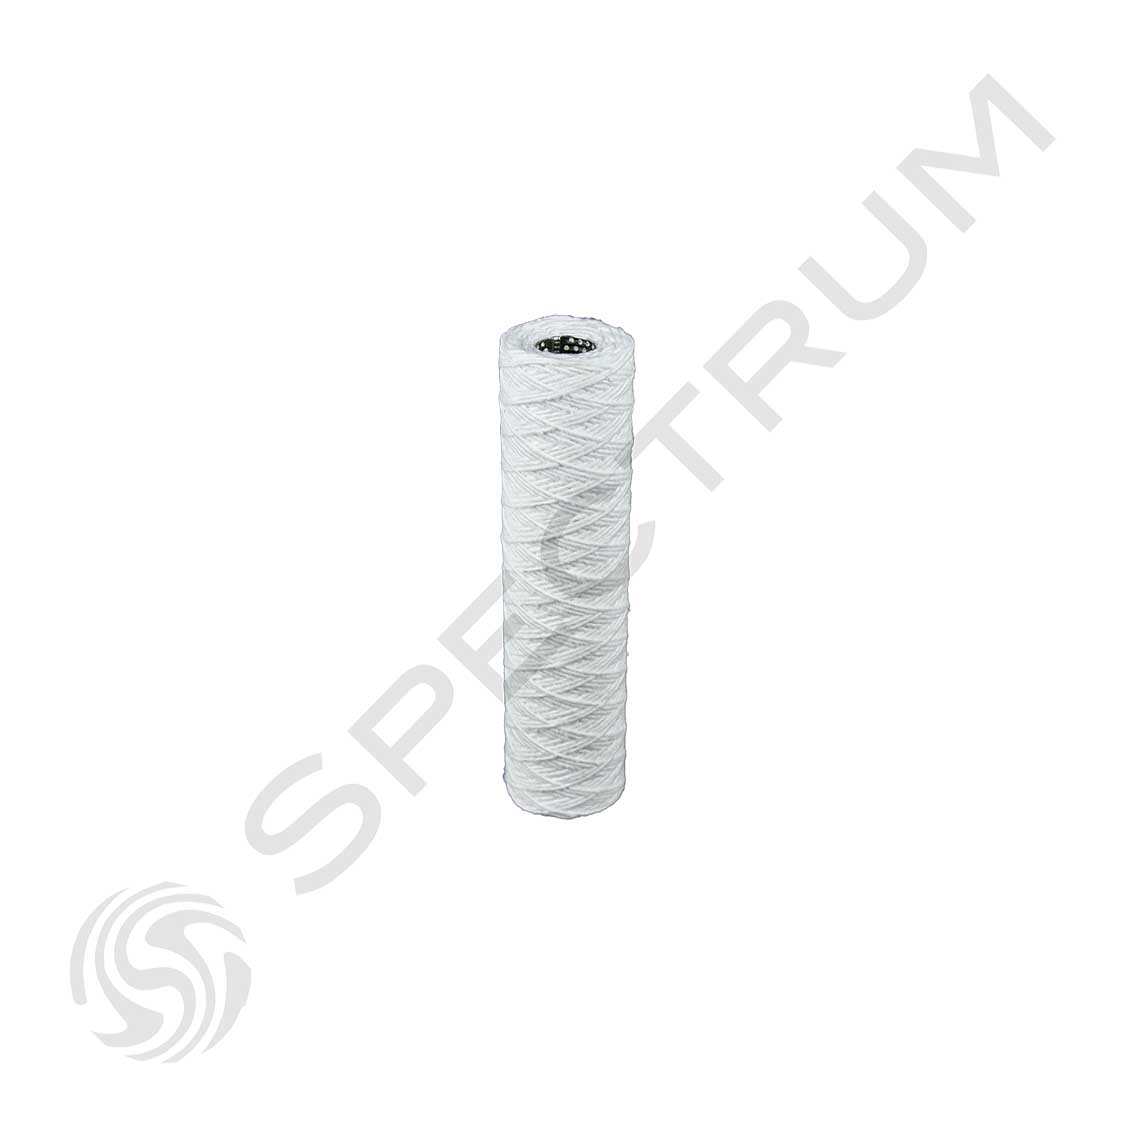 SPECTRUM SWC-5-10 Wound Cotton Filter Cartridge with Stainless Steel Core  5 micron  10